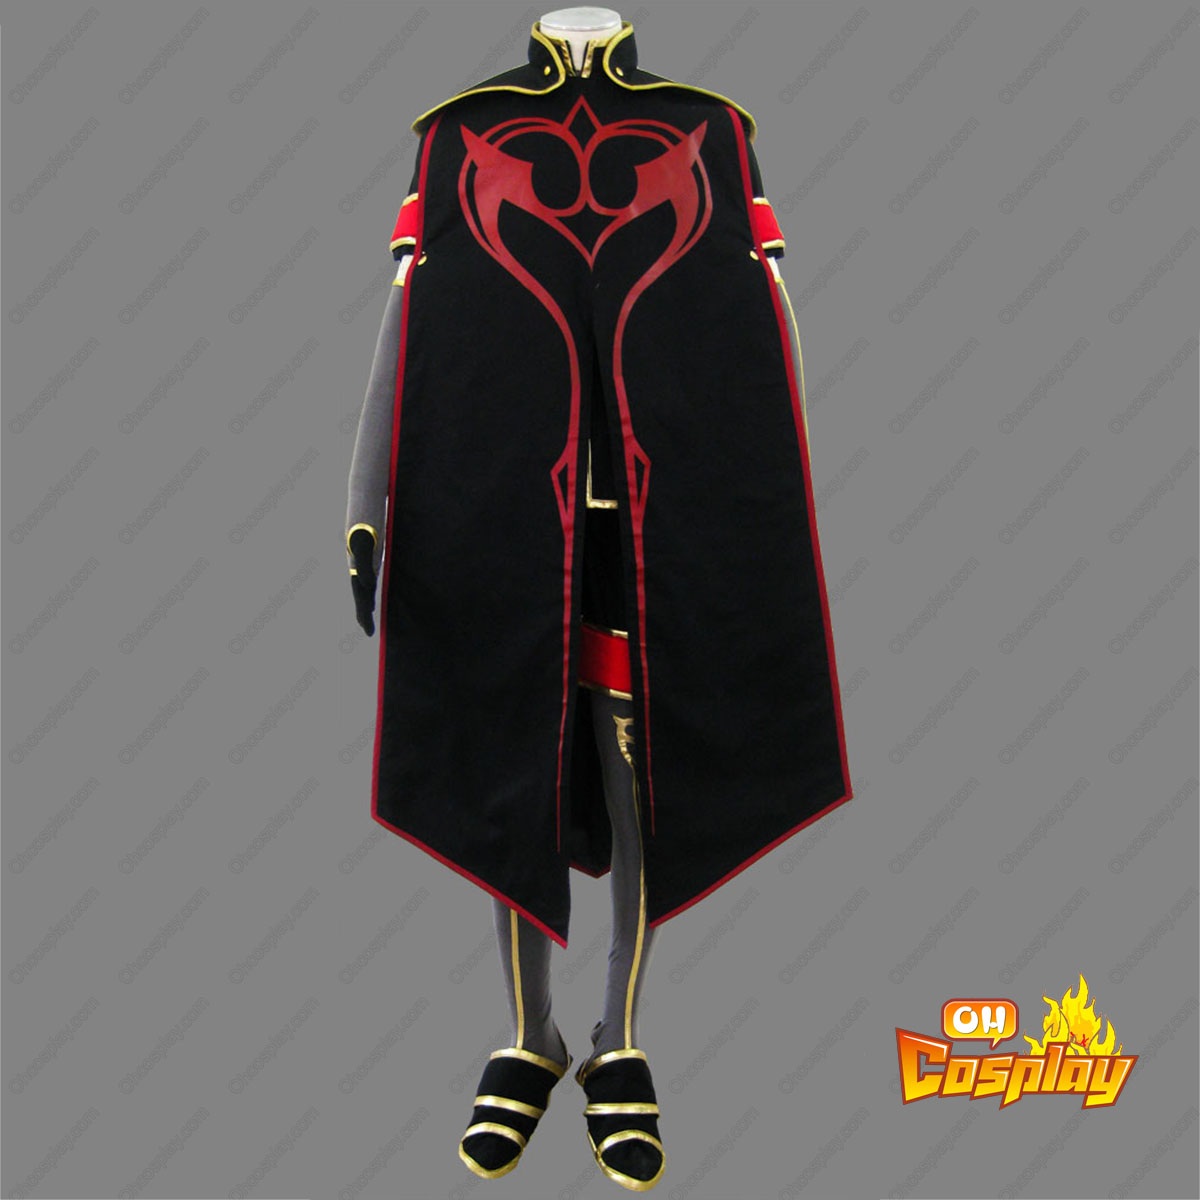 Tales of the Abyss Asch 1ST Cosplay Costumes Deluxe Edition